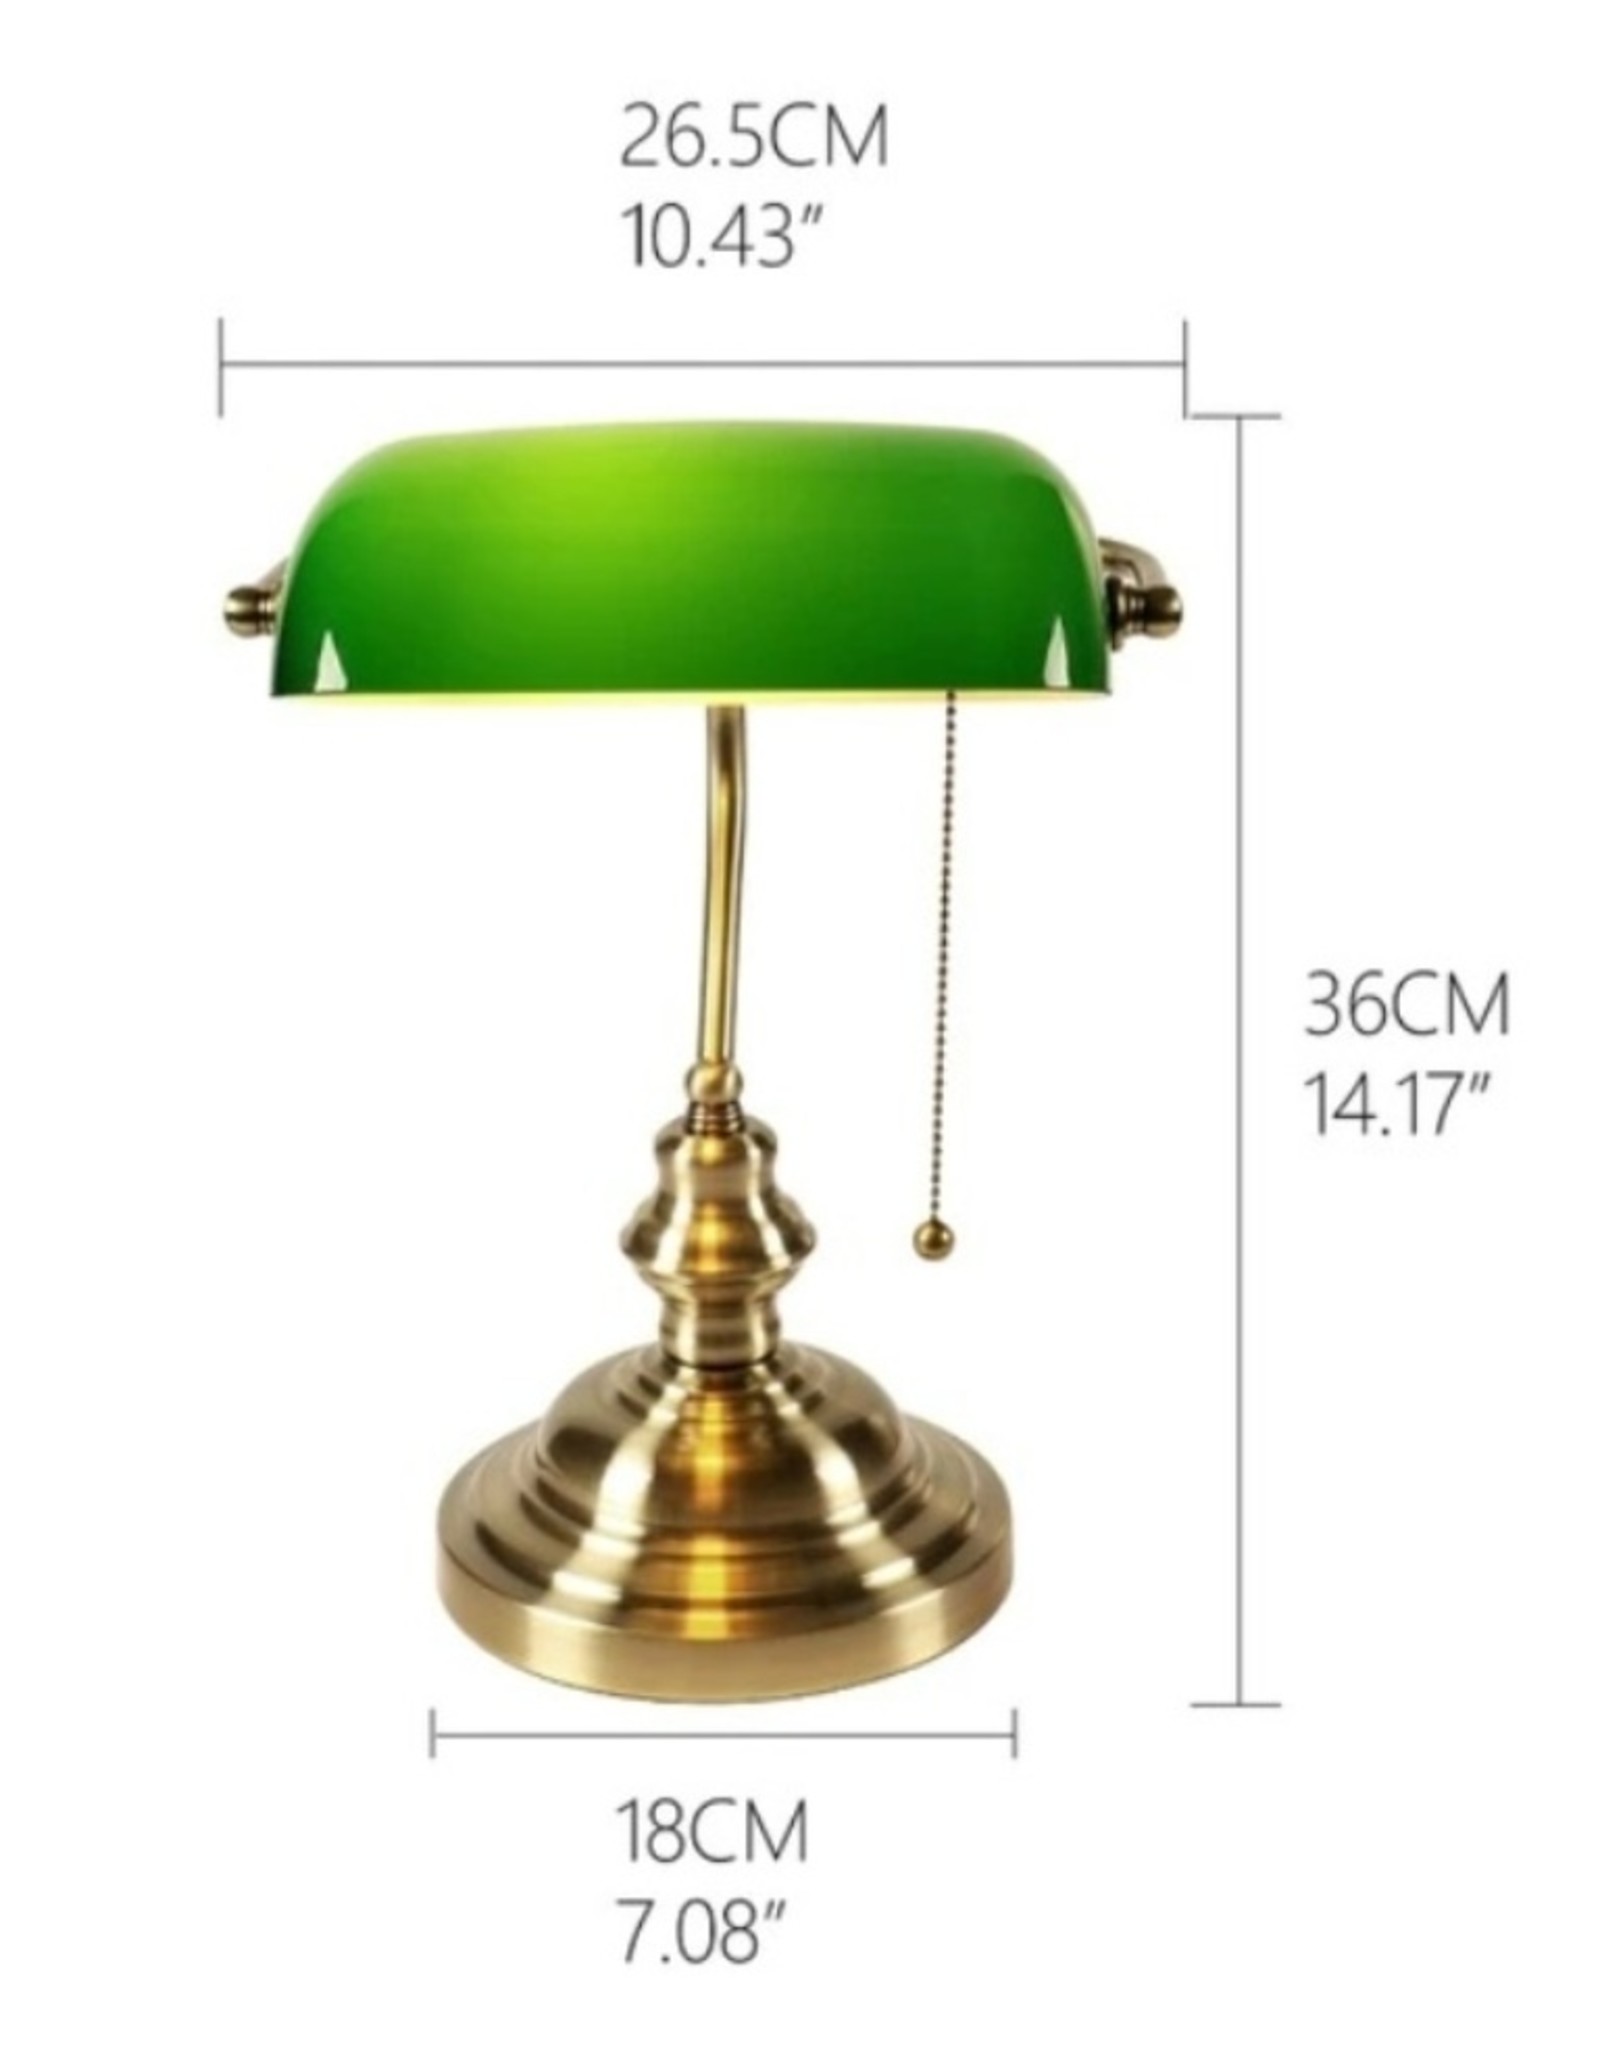 Banker's Lamp with green glass shade Art deco